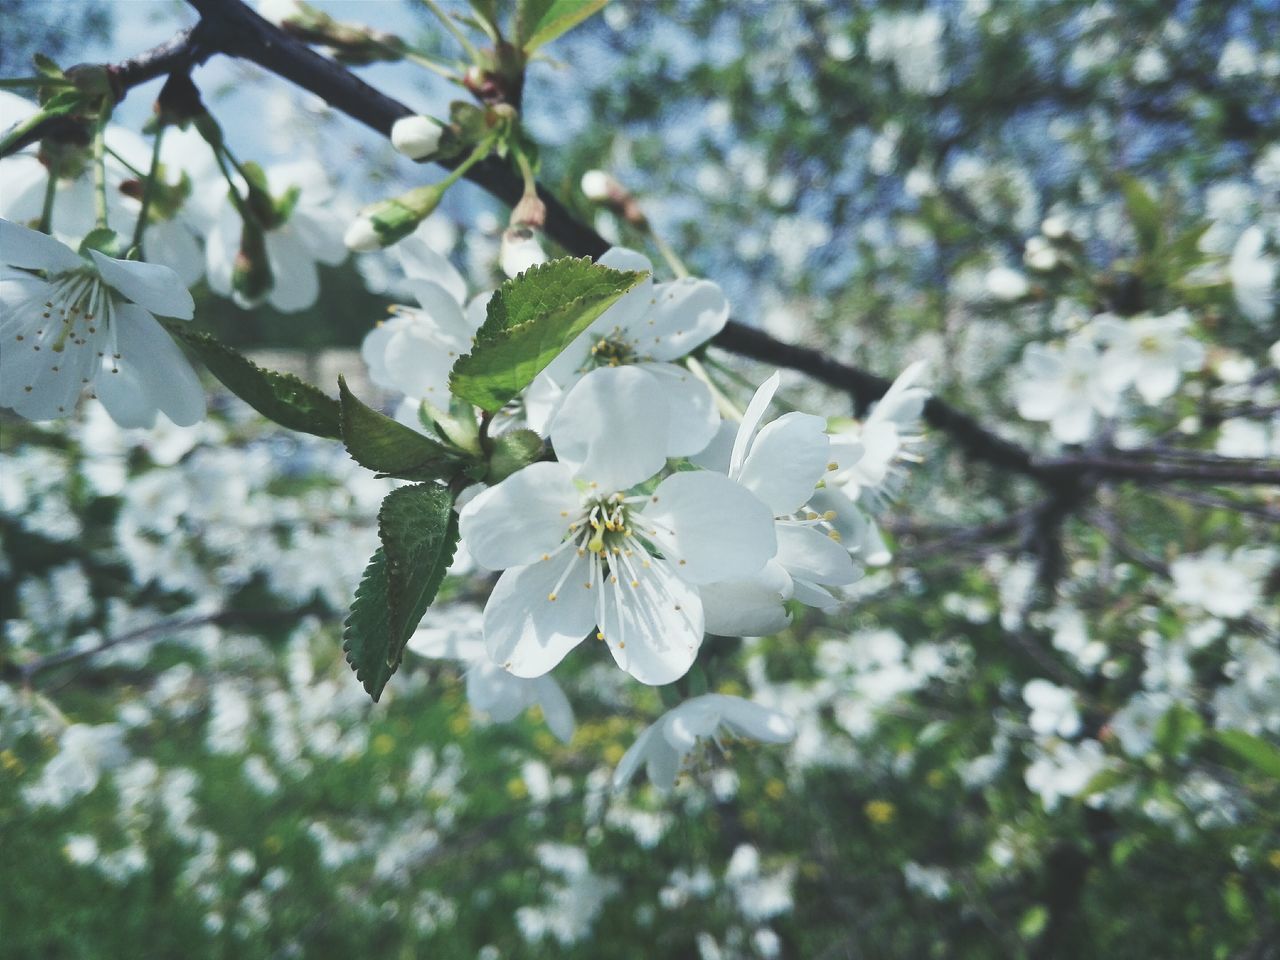 flower, freshness, growth, fragility, tree, branch, beauty in nature, focus on foreground, nature, close-up, petal, white color, cherry blossom, blossom, blooming, in bloom, flower head, cherry tree, springtime, twig